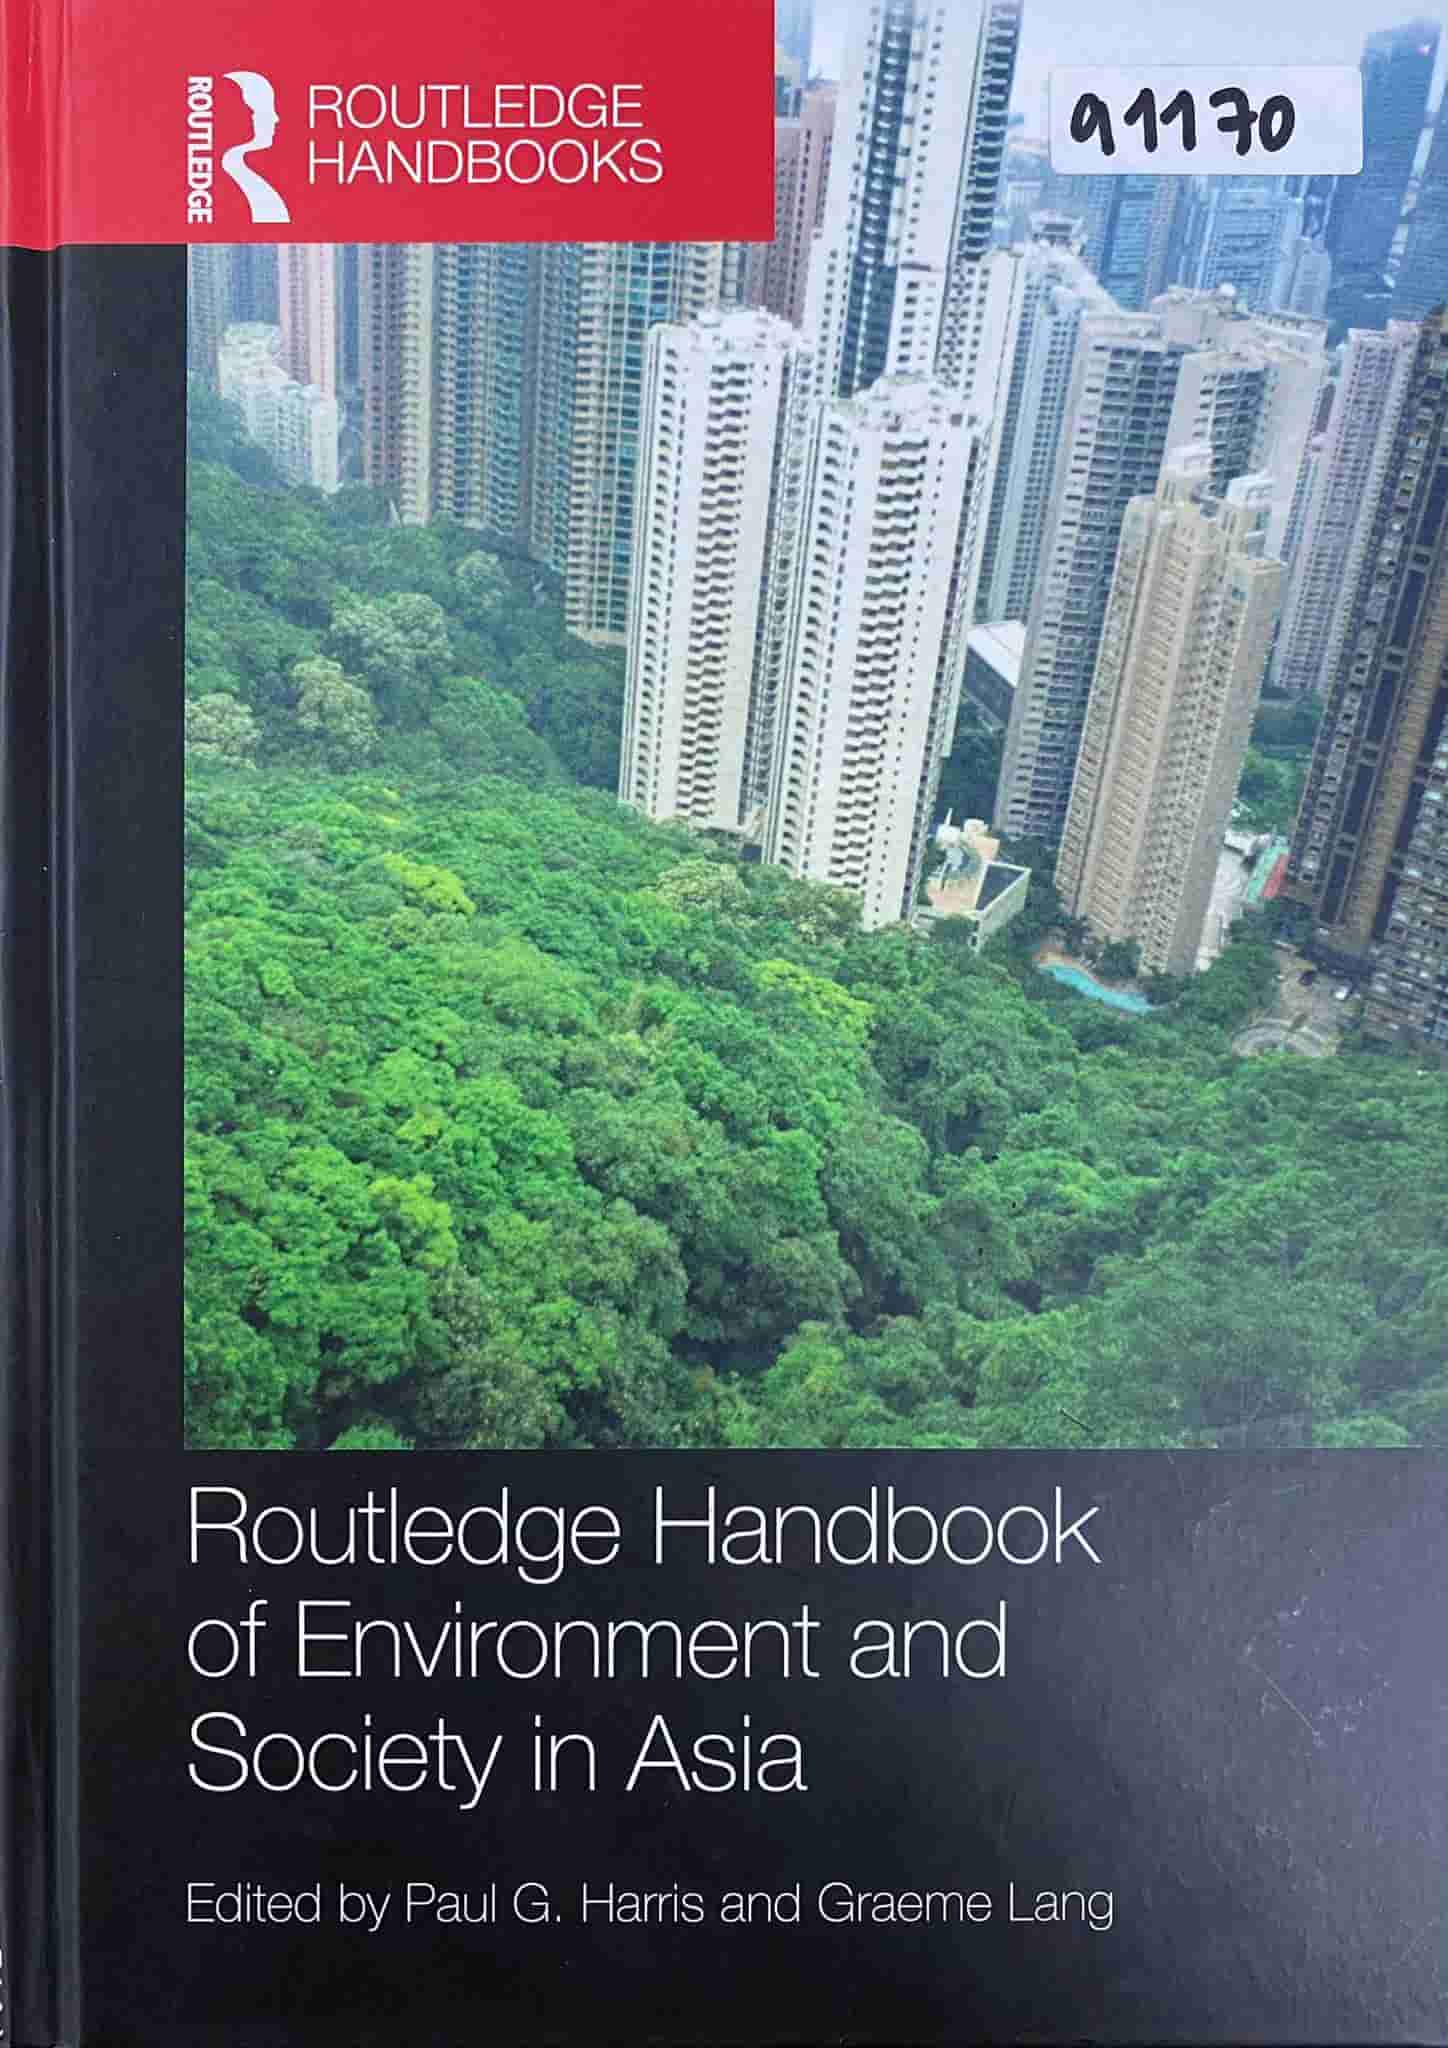 Routledge handbook of environment and society in Asia